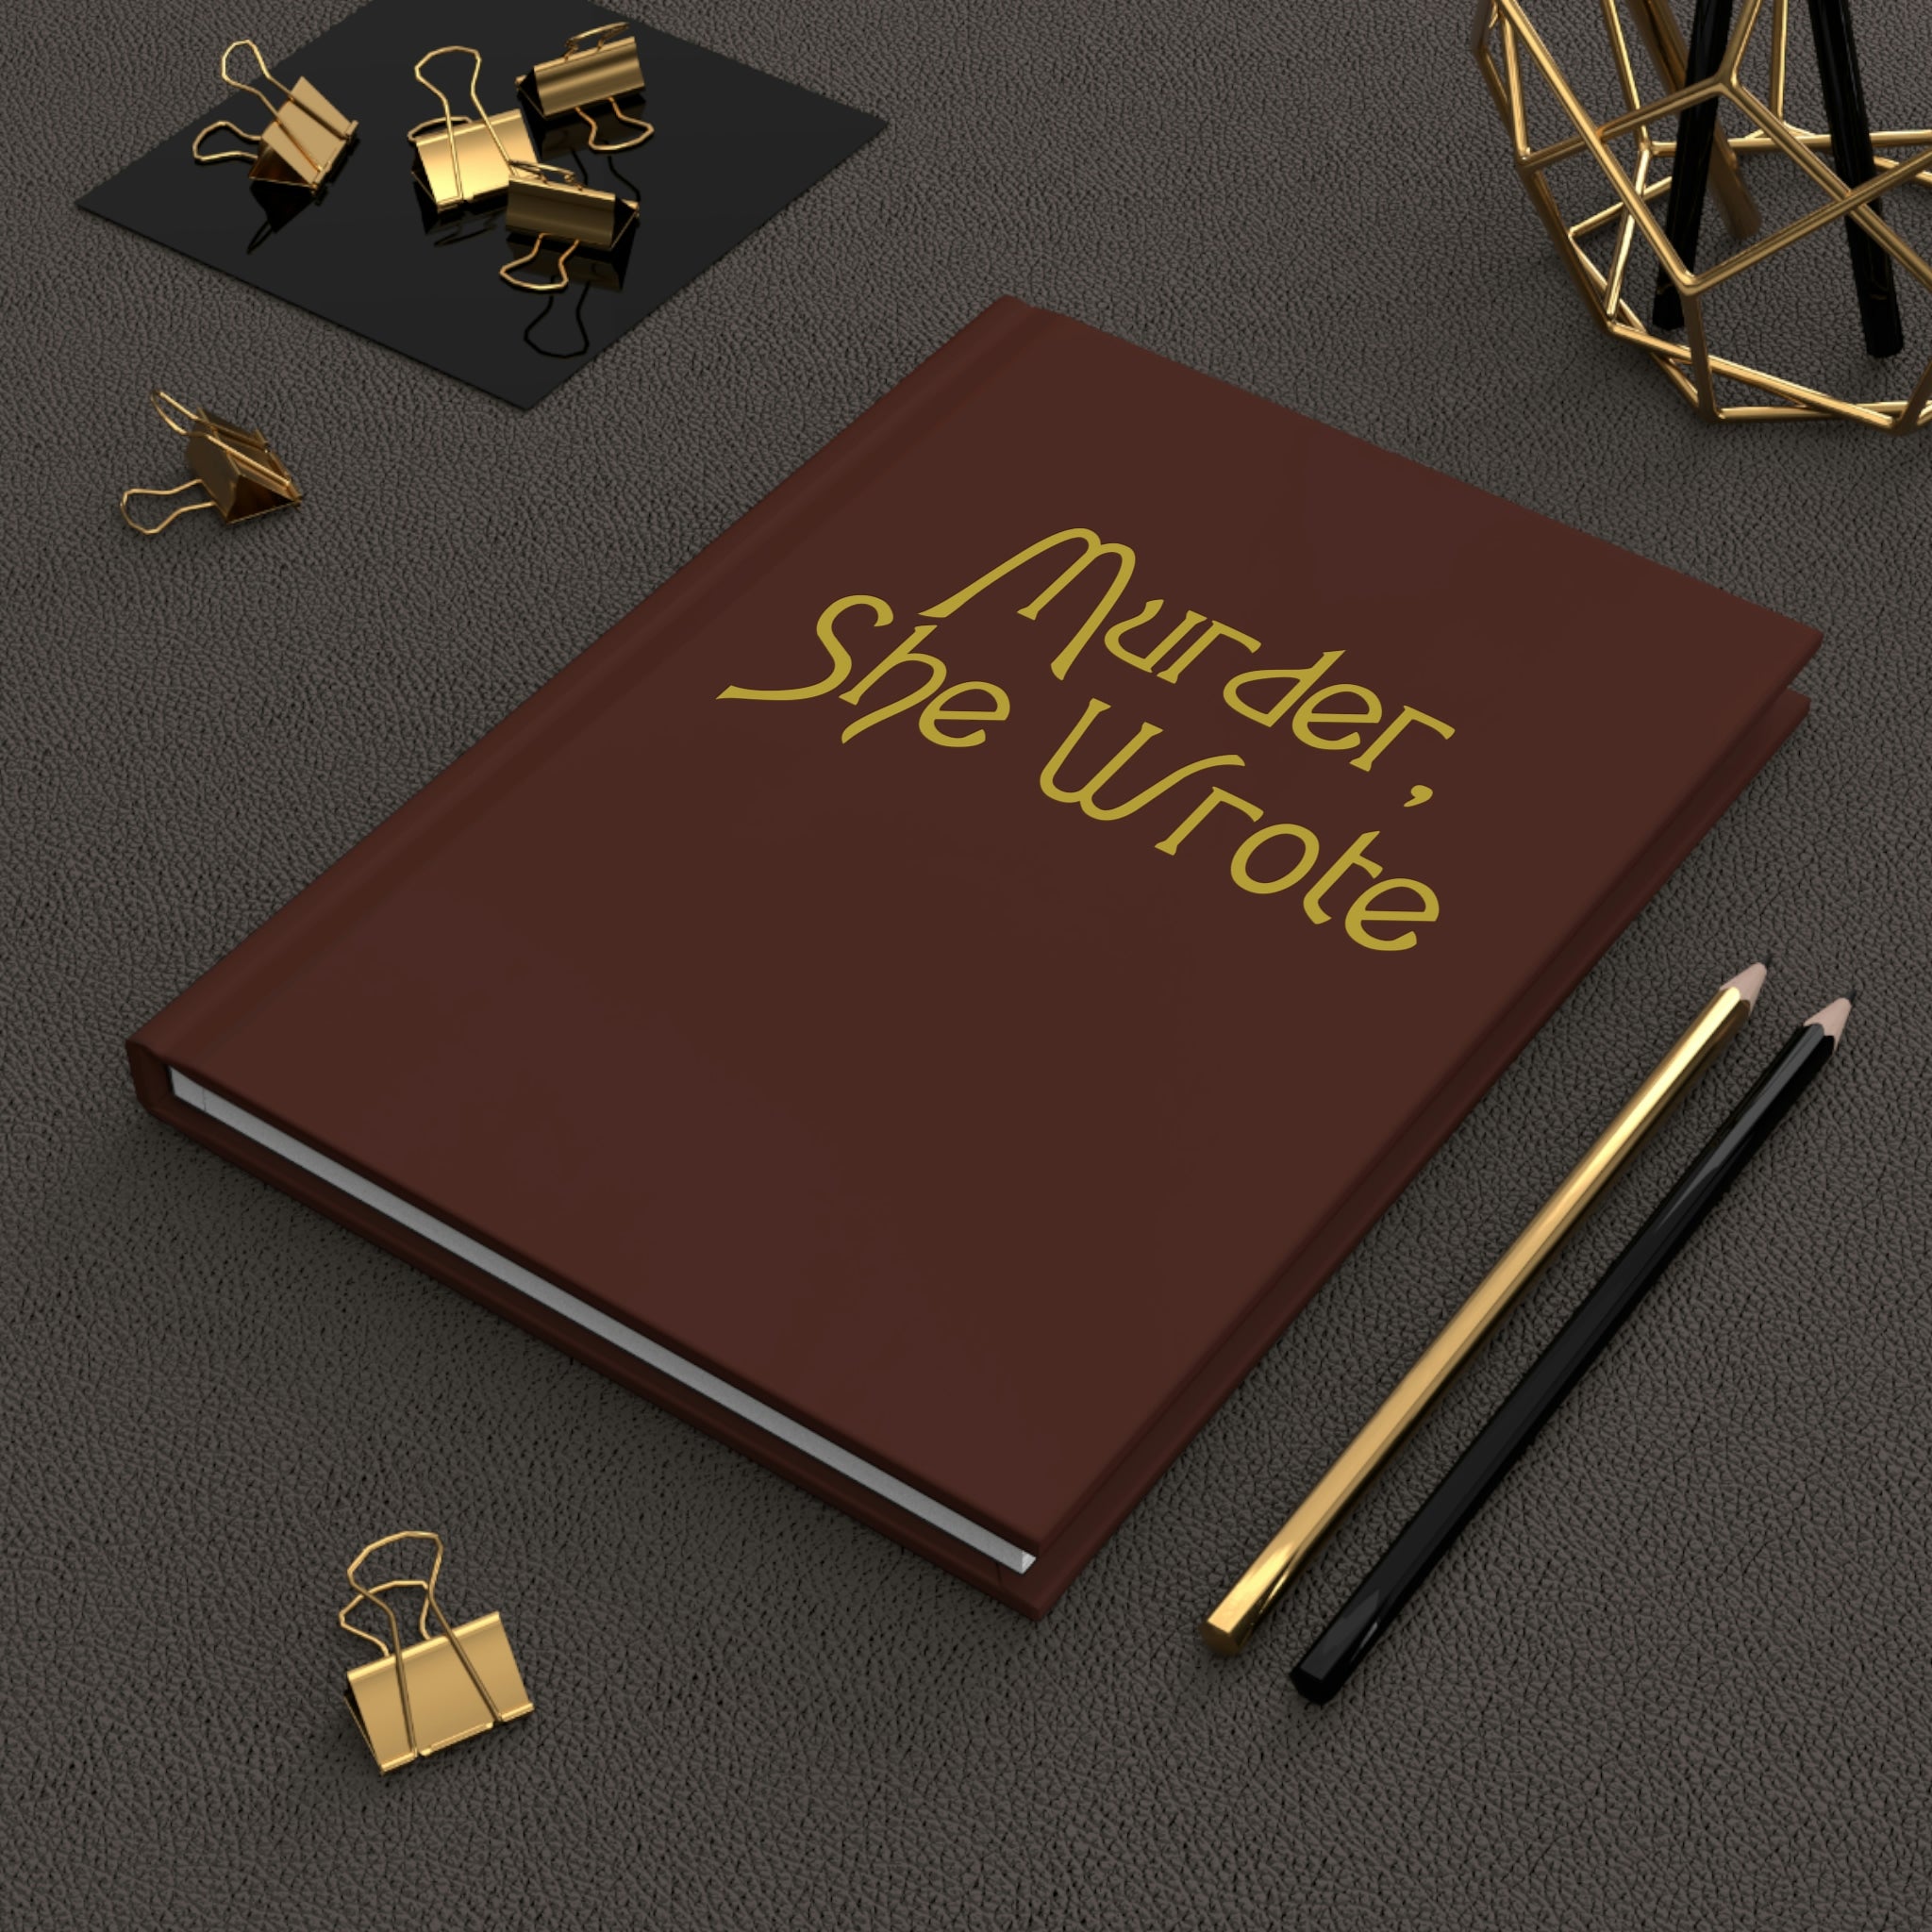 Murder She Wrote Journal in Hardcover laying on desk